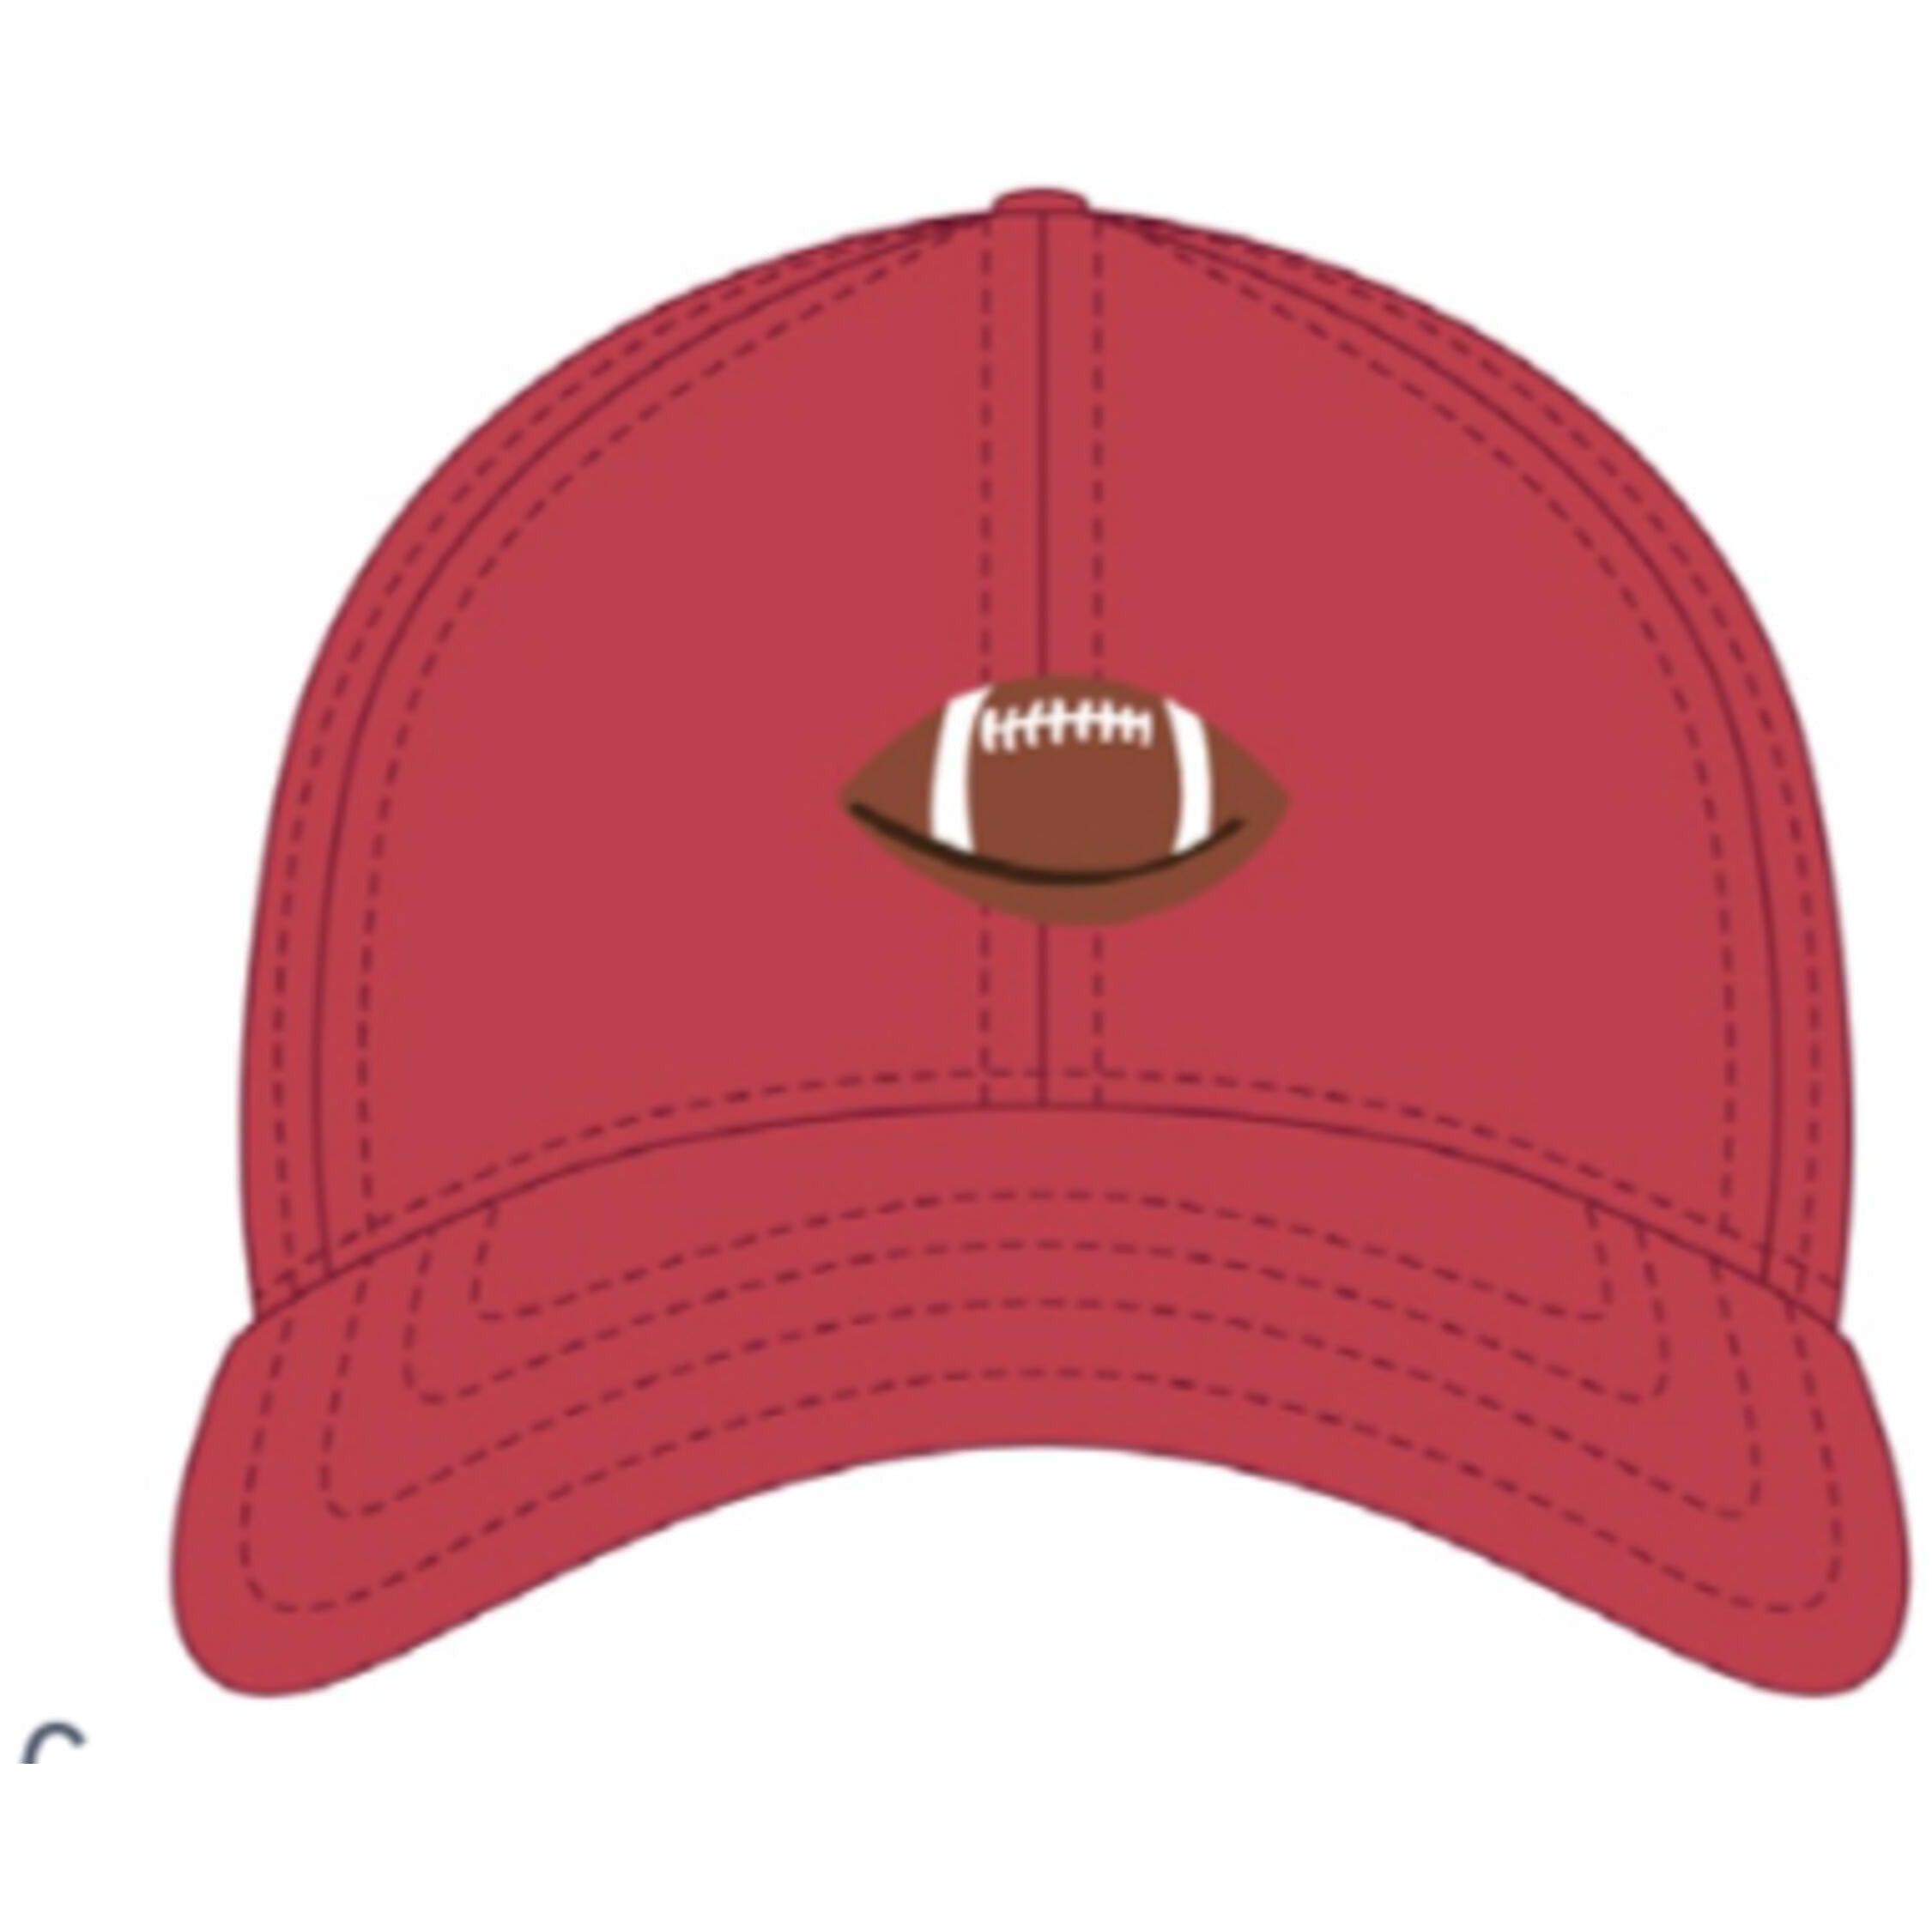 Baseball Hat - Football on Weathered Red